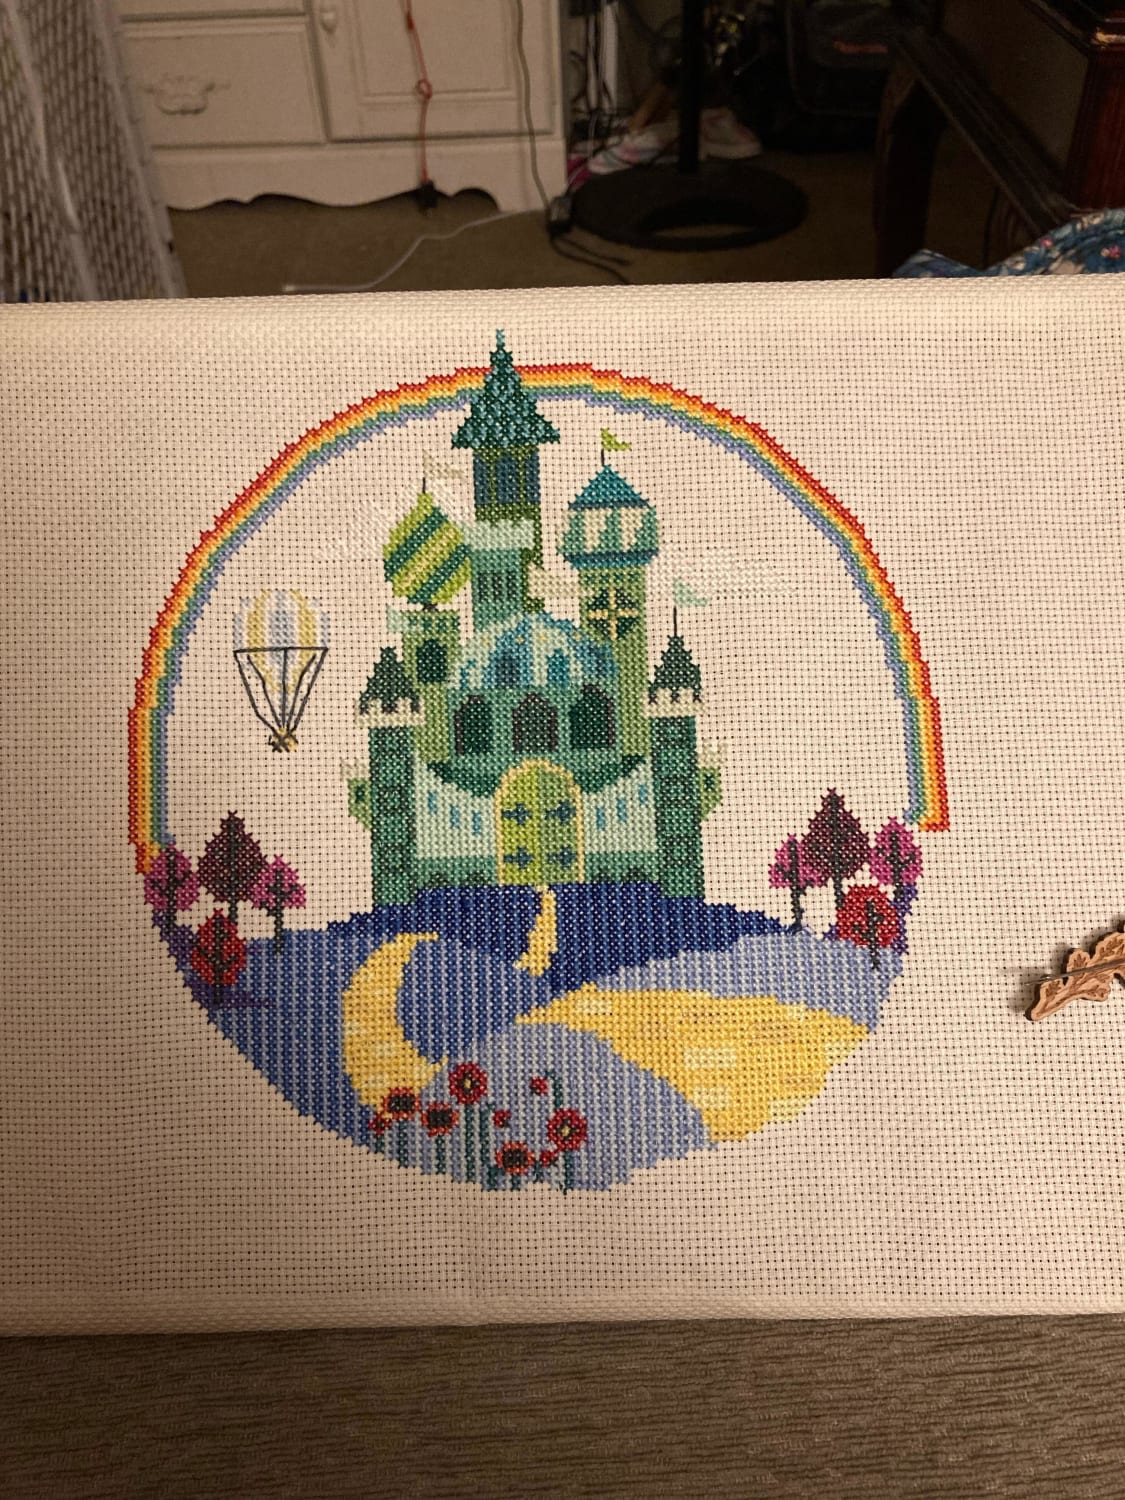 [FO] The Emerald City of Oz… I love how this turned out! My second finish of the year! Now to move on to one of my other 5 WIPs 😅 pattern is the emerald city by satsuma street on Etsy.